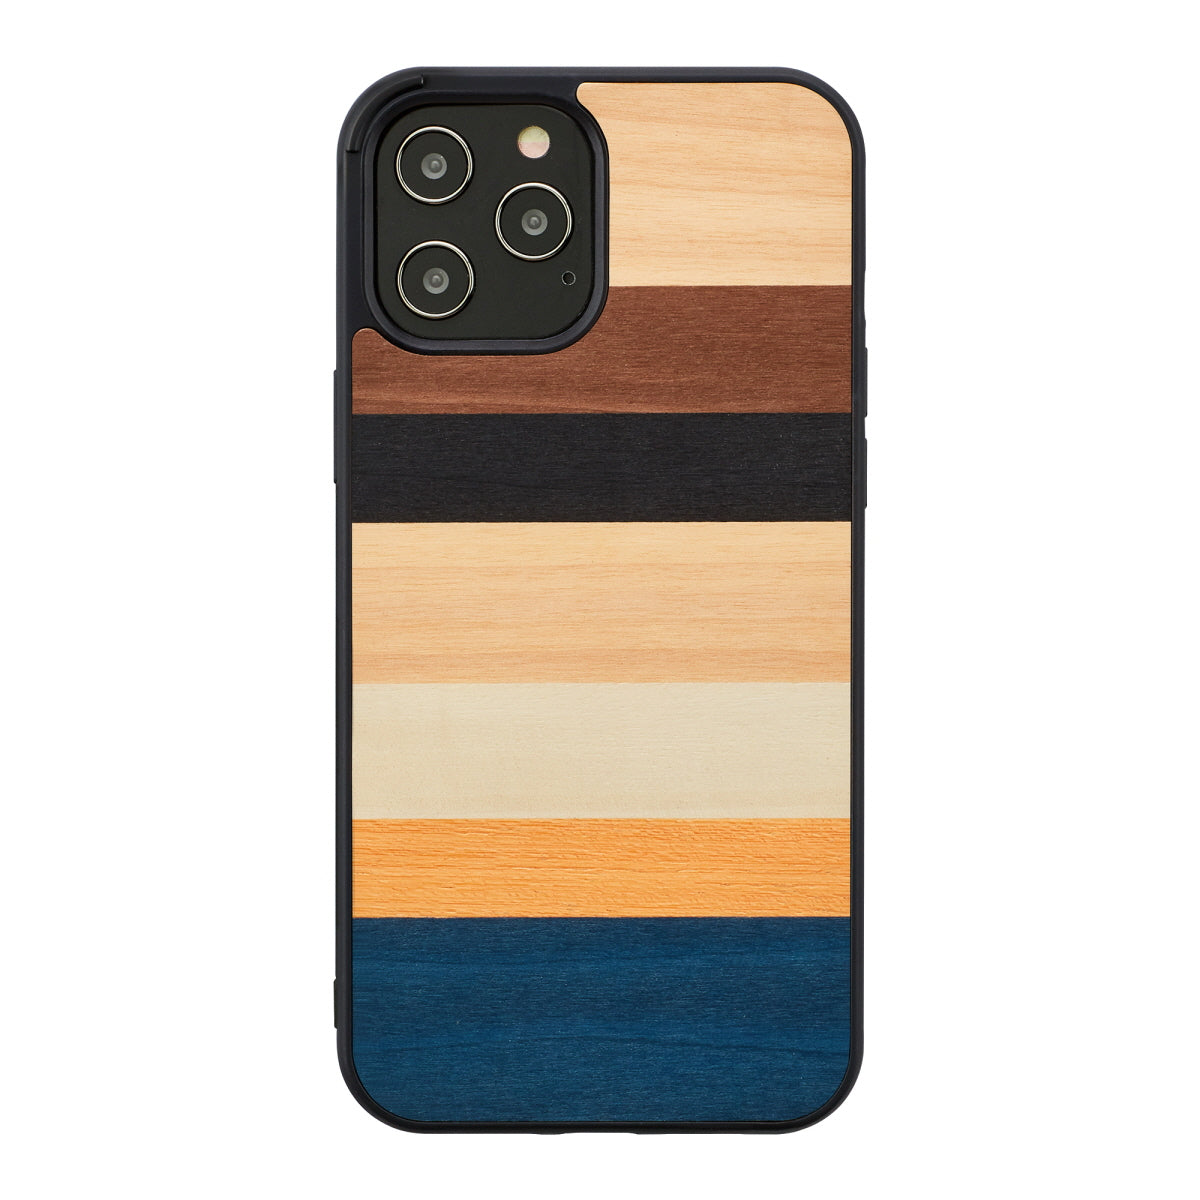 Man & Wood Case For iPhone 12 Pro Max - Province